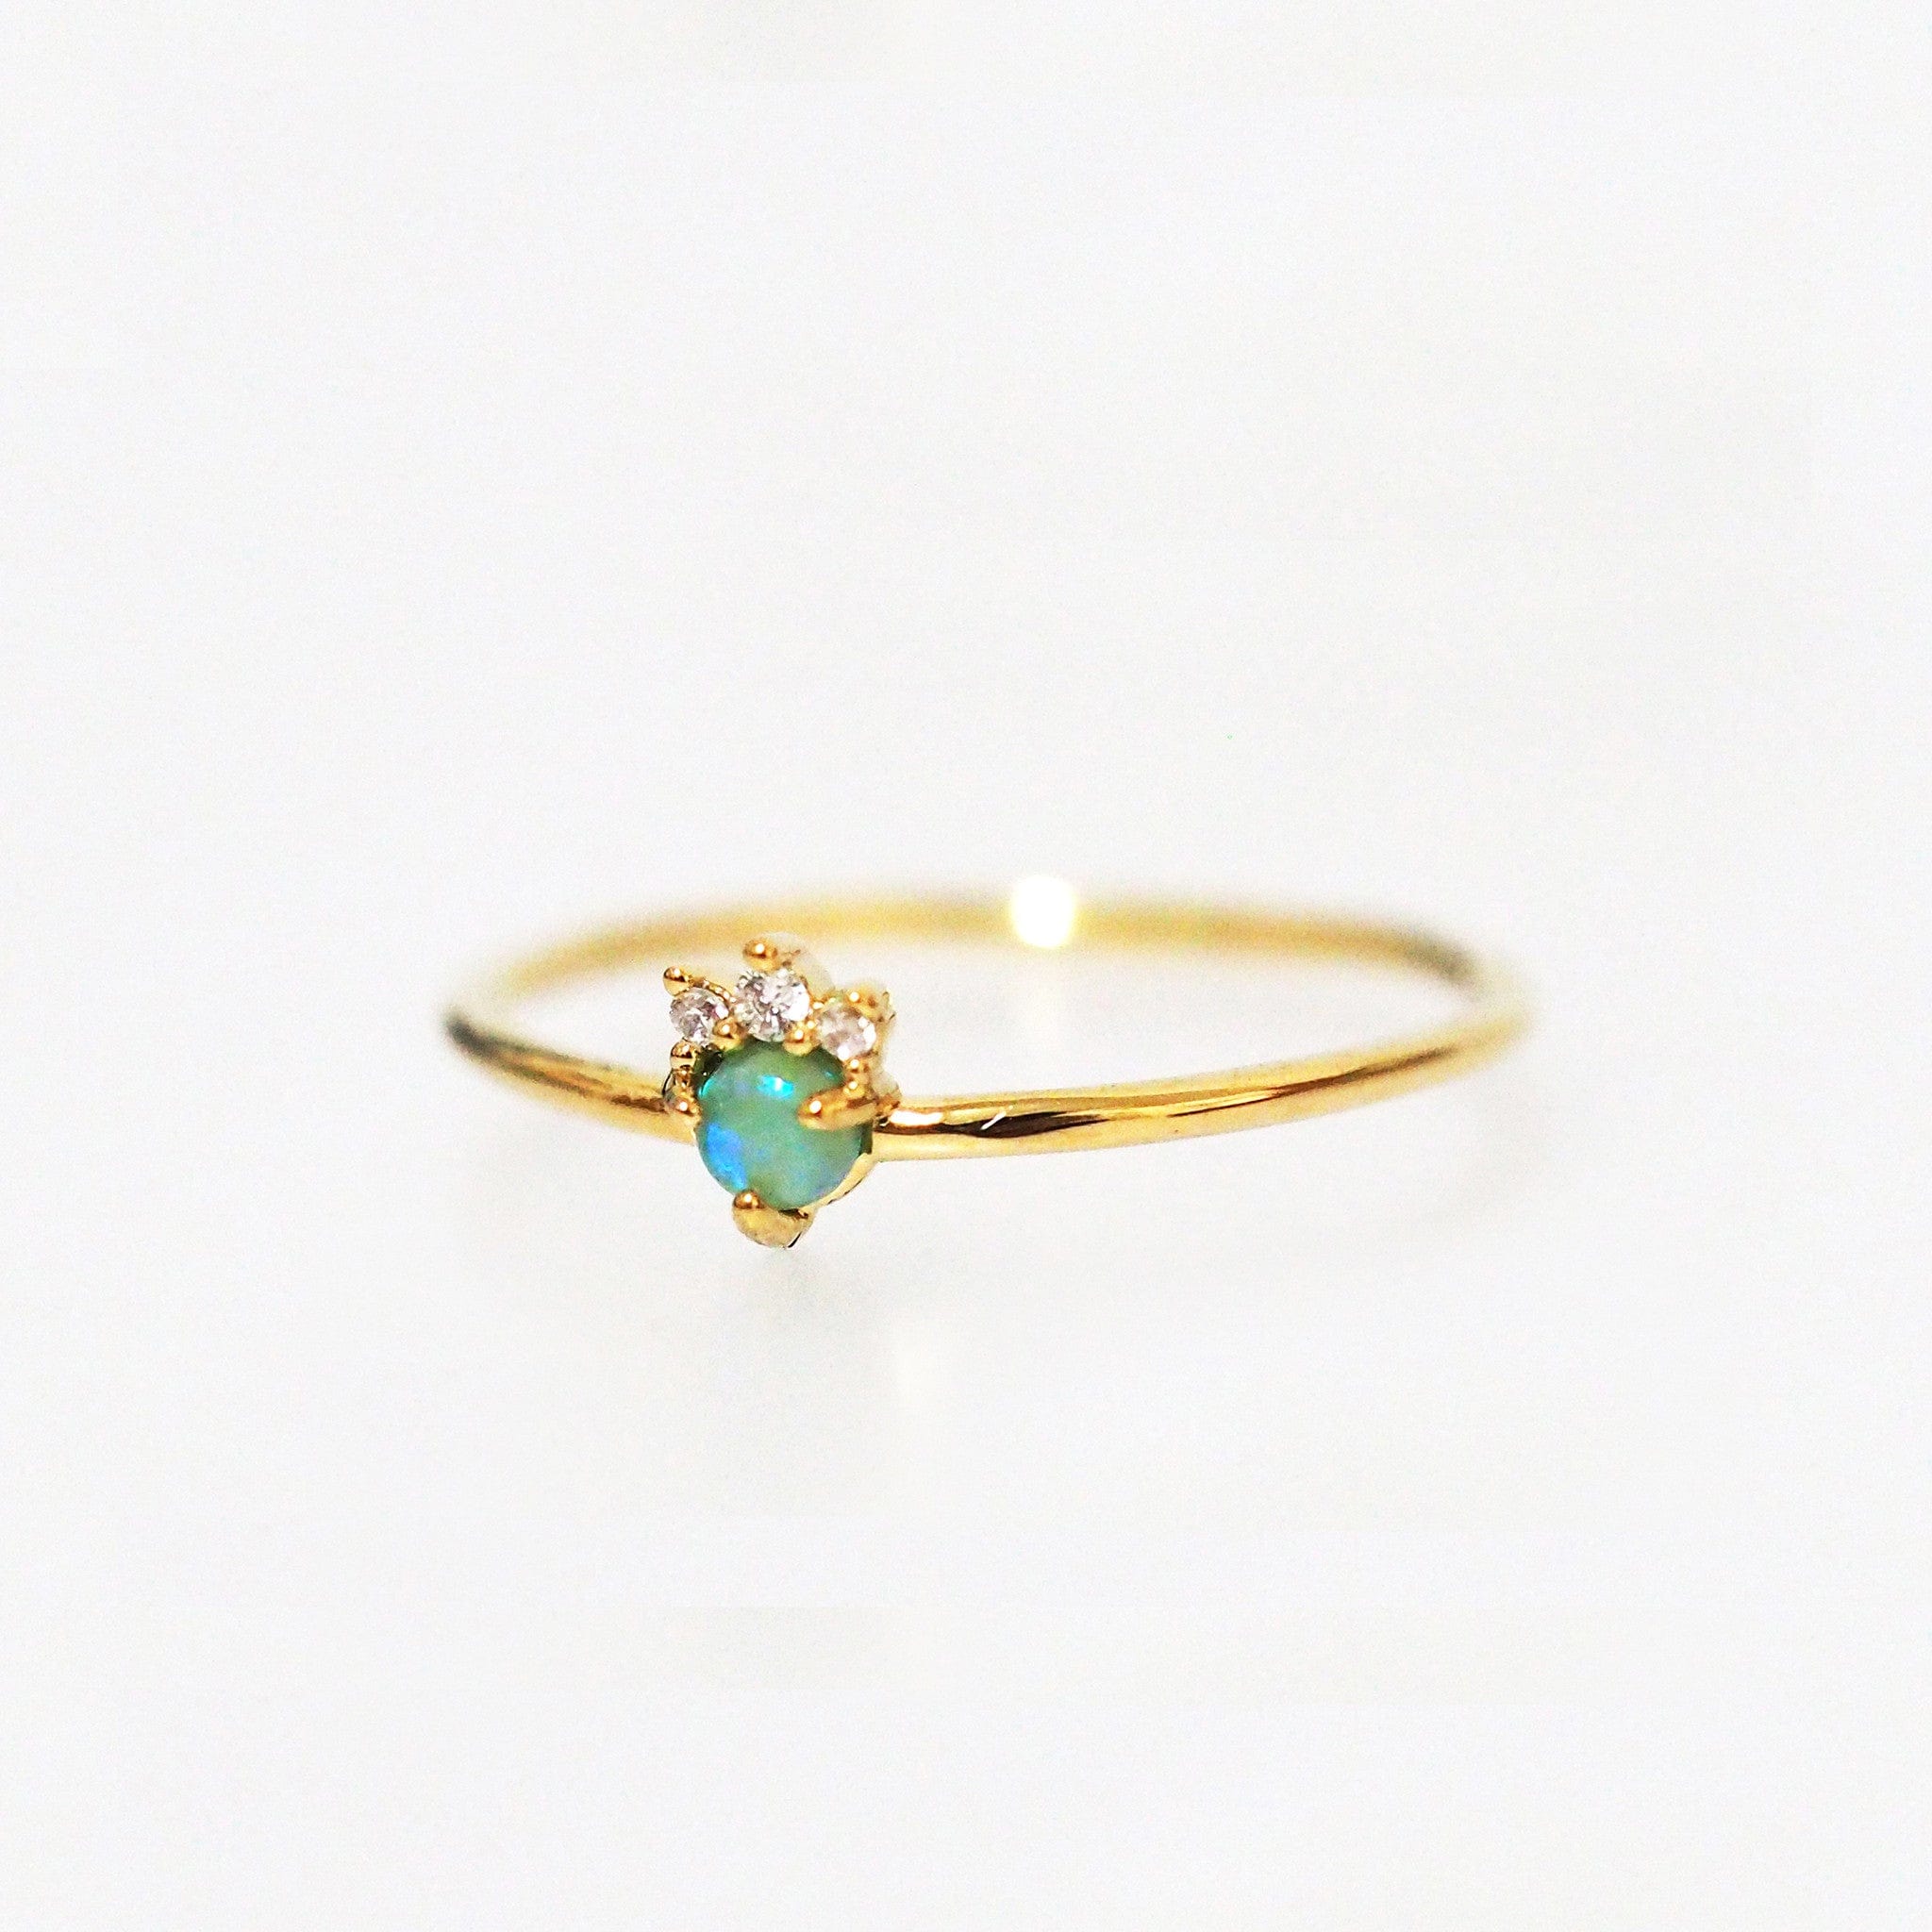 TAI JEWELRY Rings 6 Cz Crowned Blue Opal Ring